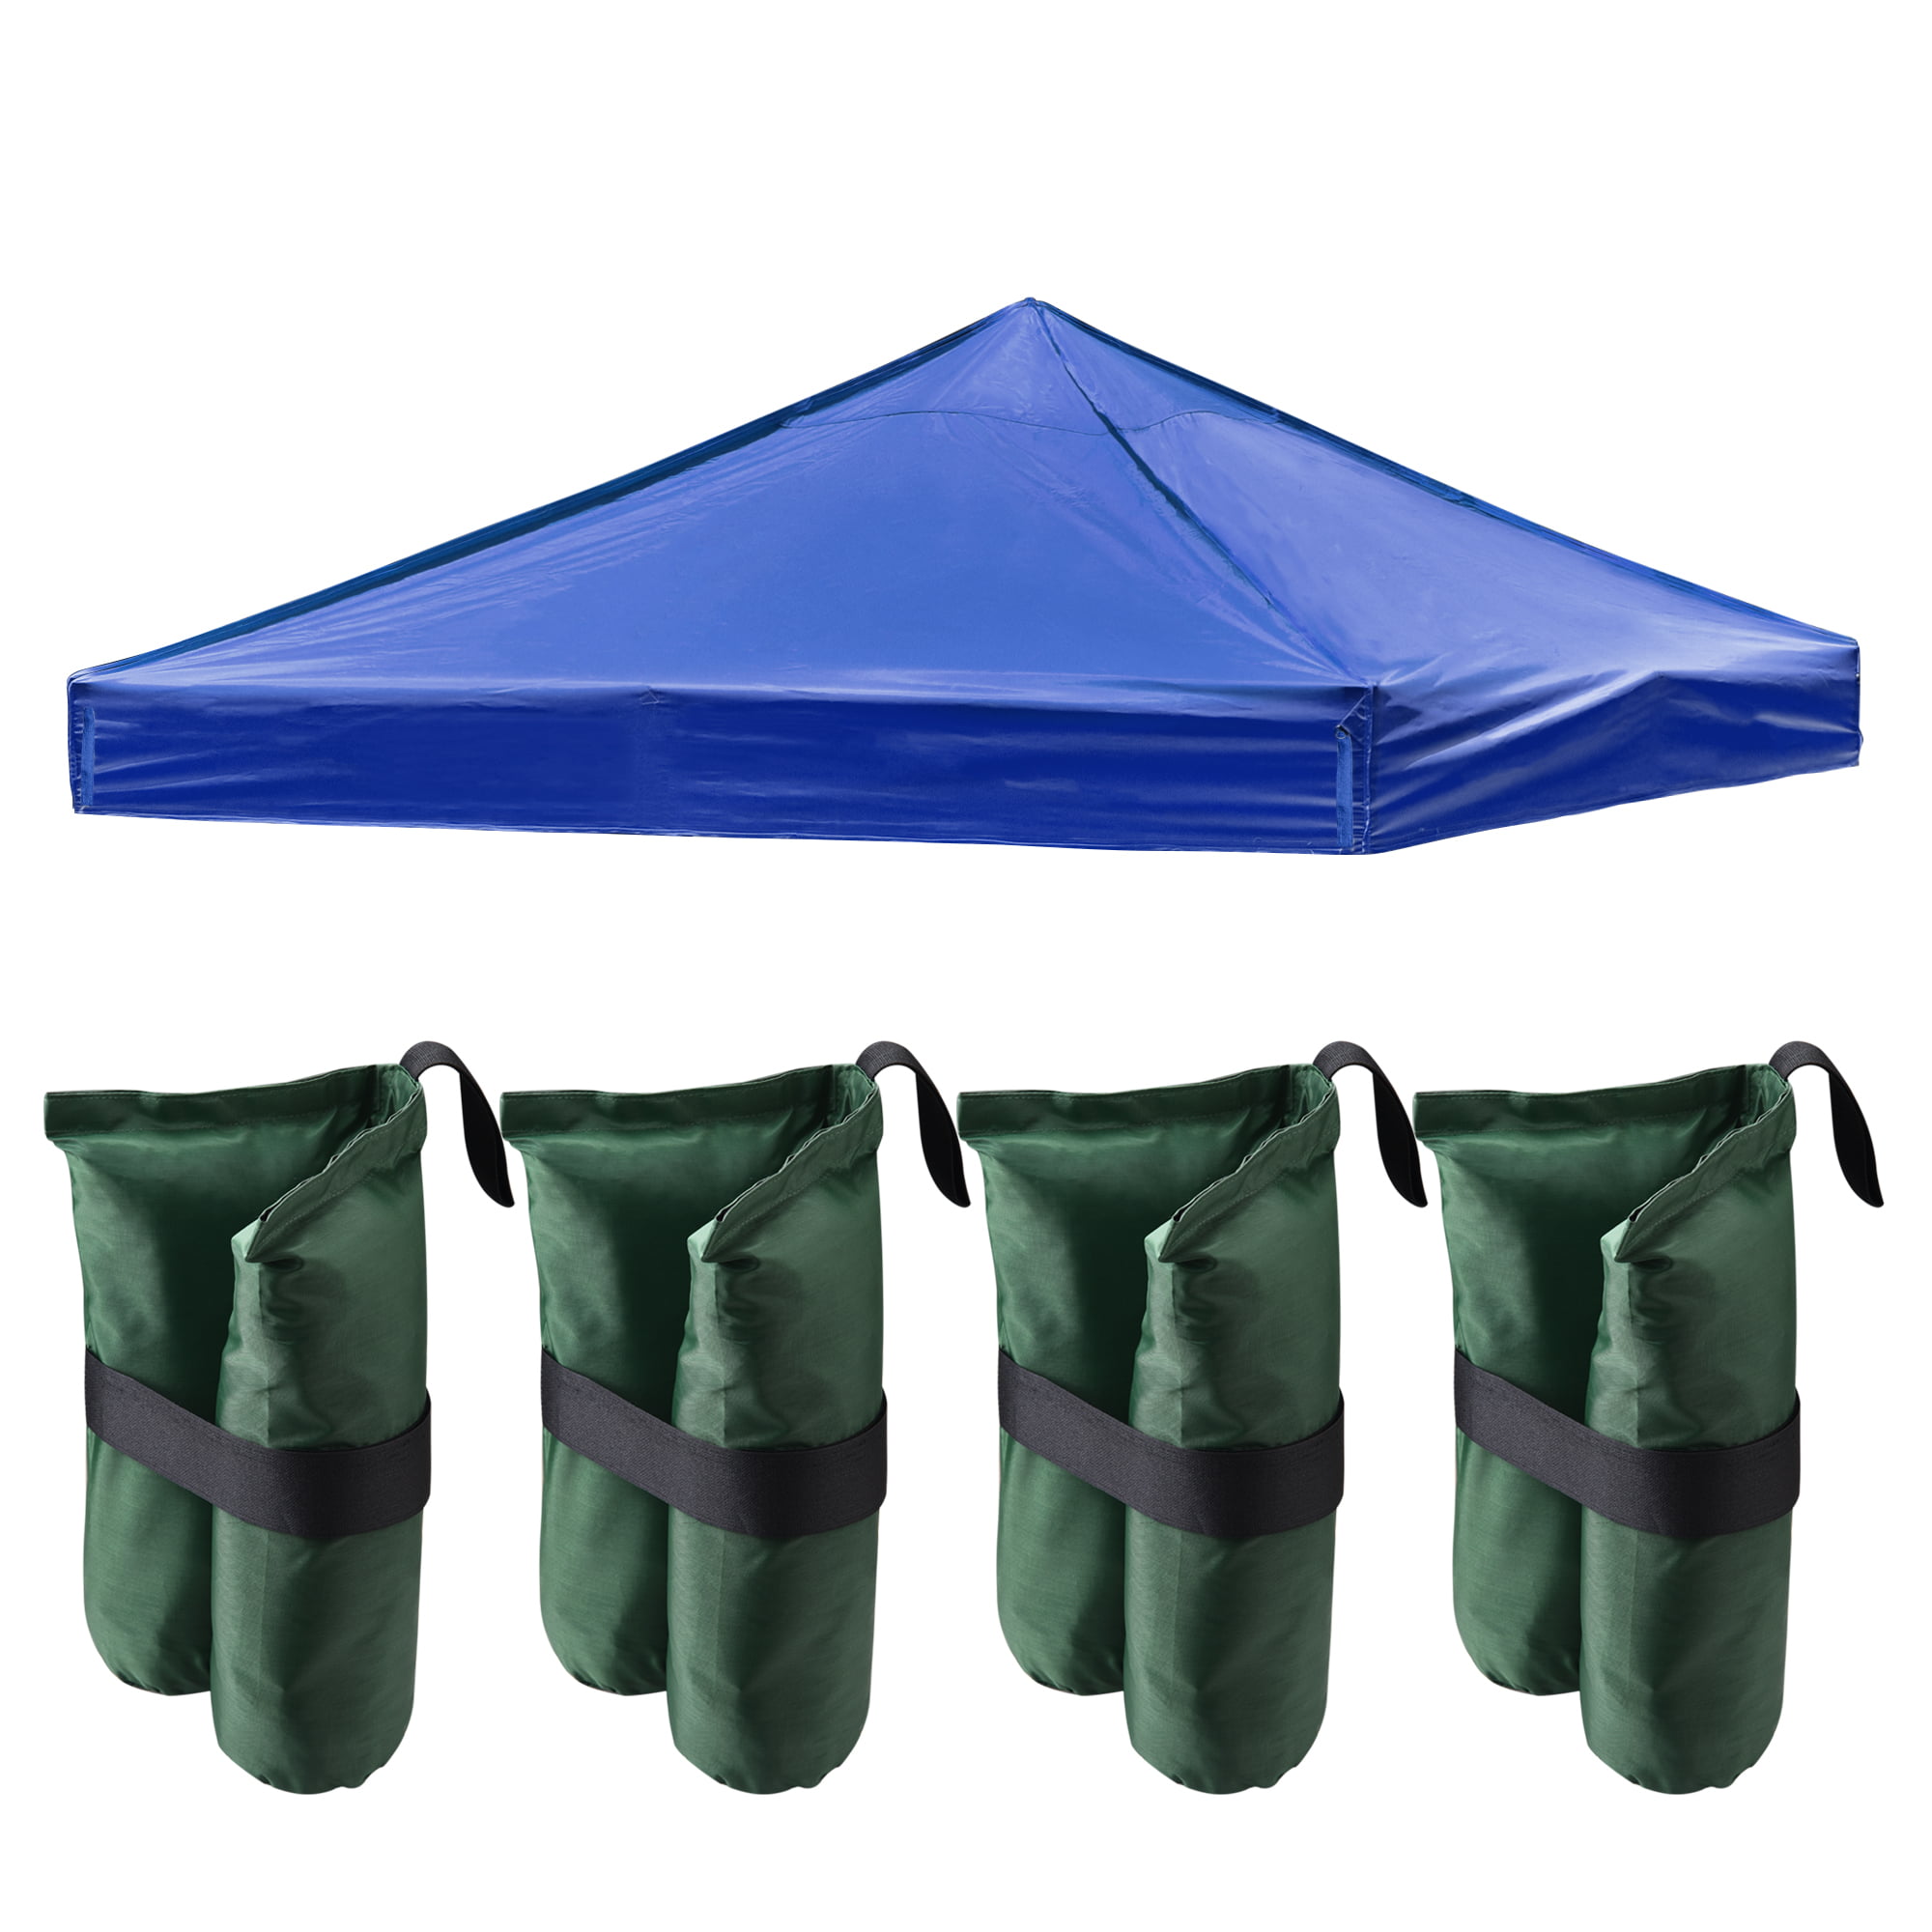 Camping Canopy Leg Tent Sun Shelter Weight Sand Bags Instant Patio Tents O3 